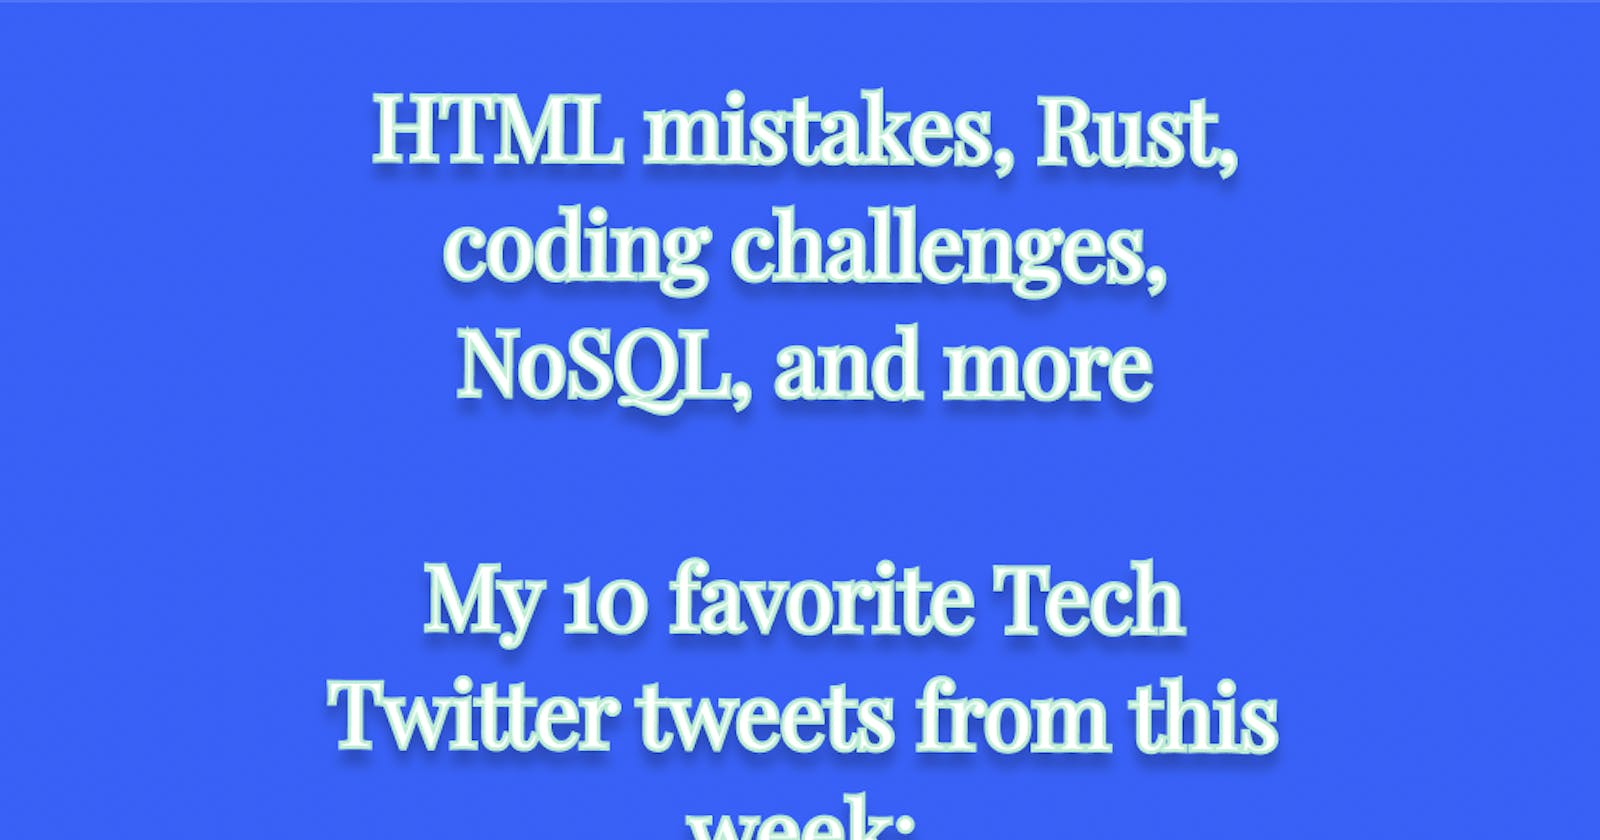 HTML mistakes, Rust, coding challenges, NoSQL, and more

My 10 favorite Tech Twitter tweets from this week: